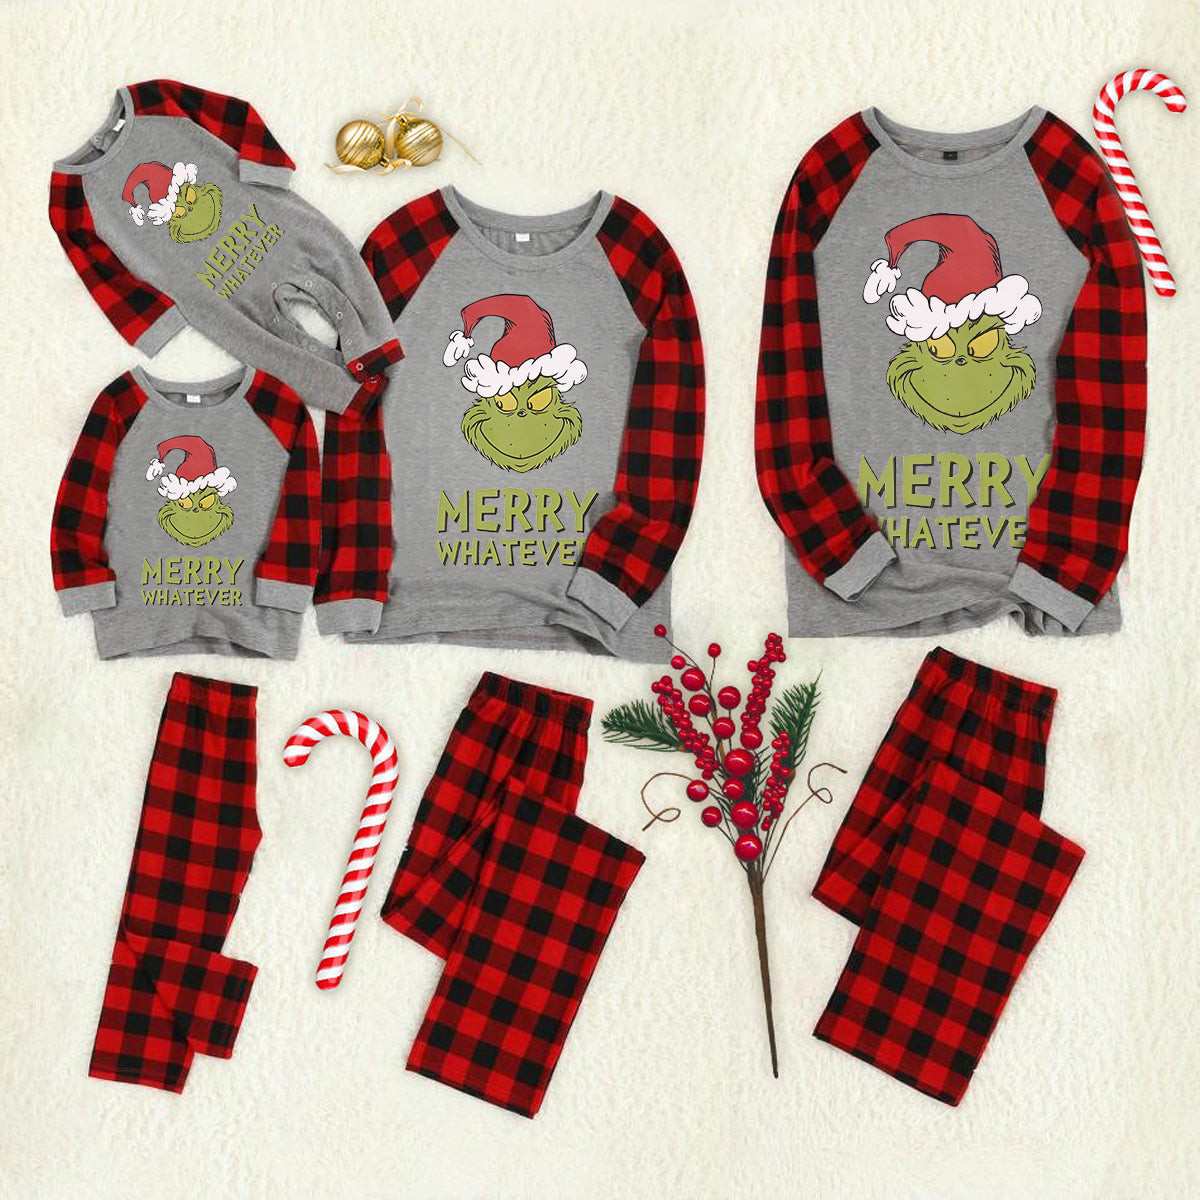 Christmas Cartoon and 'Merry Whatever' Letter Print Grey Contrast top and Black & Red Plaid Pants Family Matching Pajamas Set With Dog Bandana